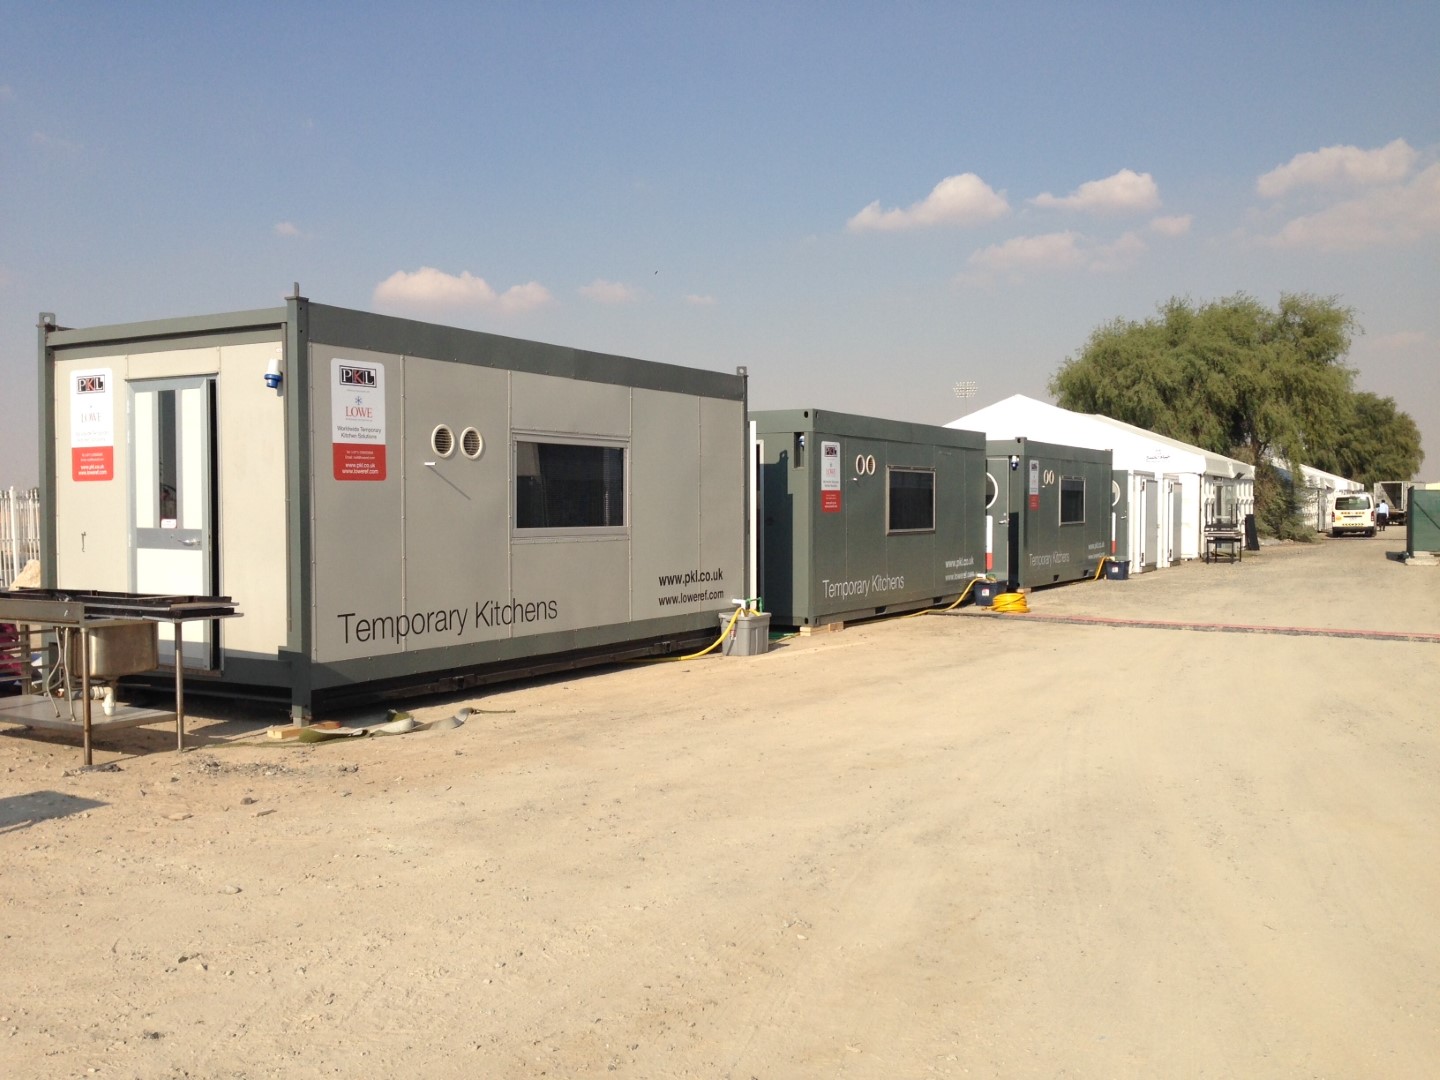 Dubai Rugby 7's Temporary Kitchen